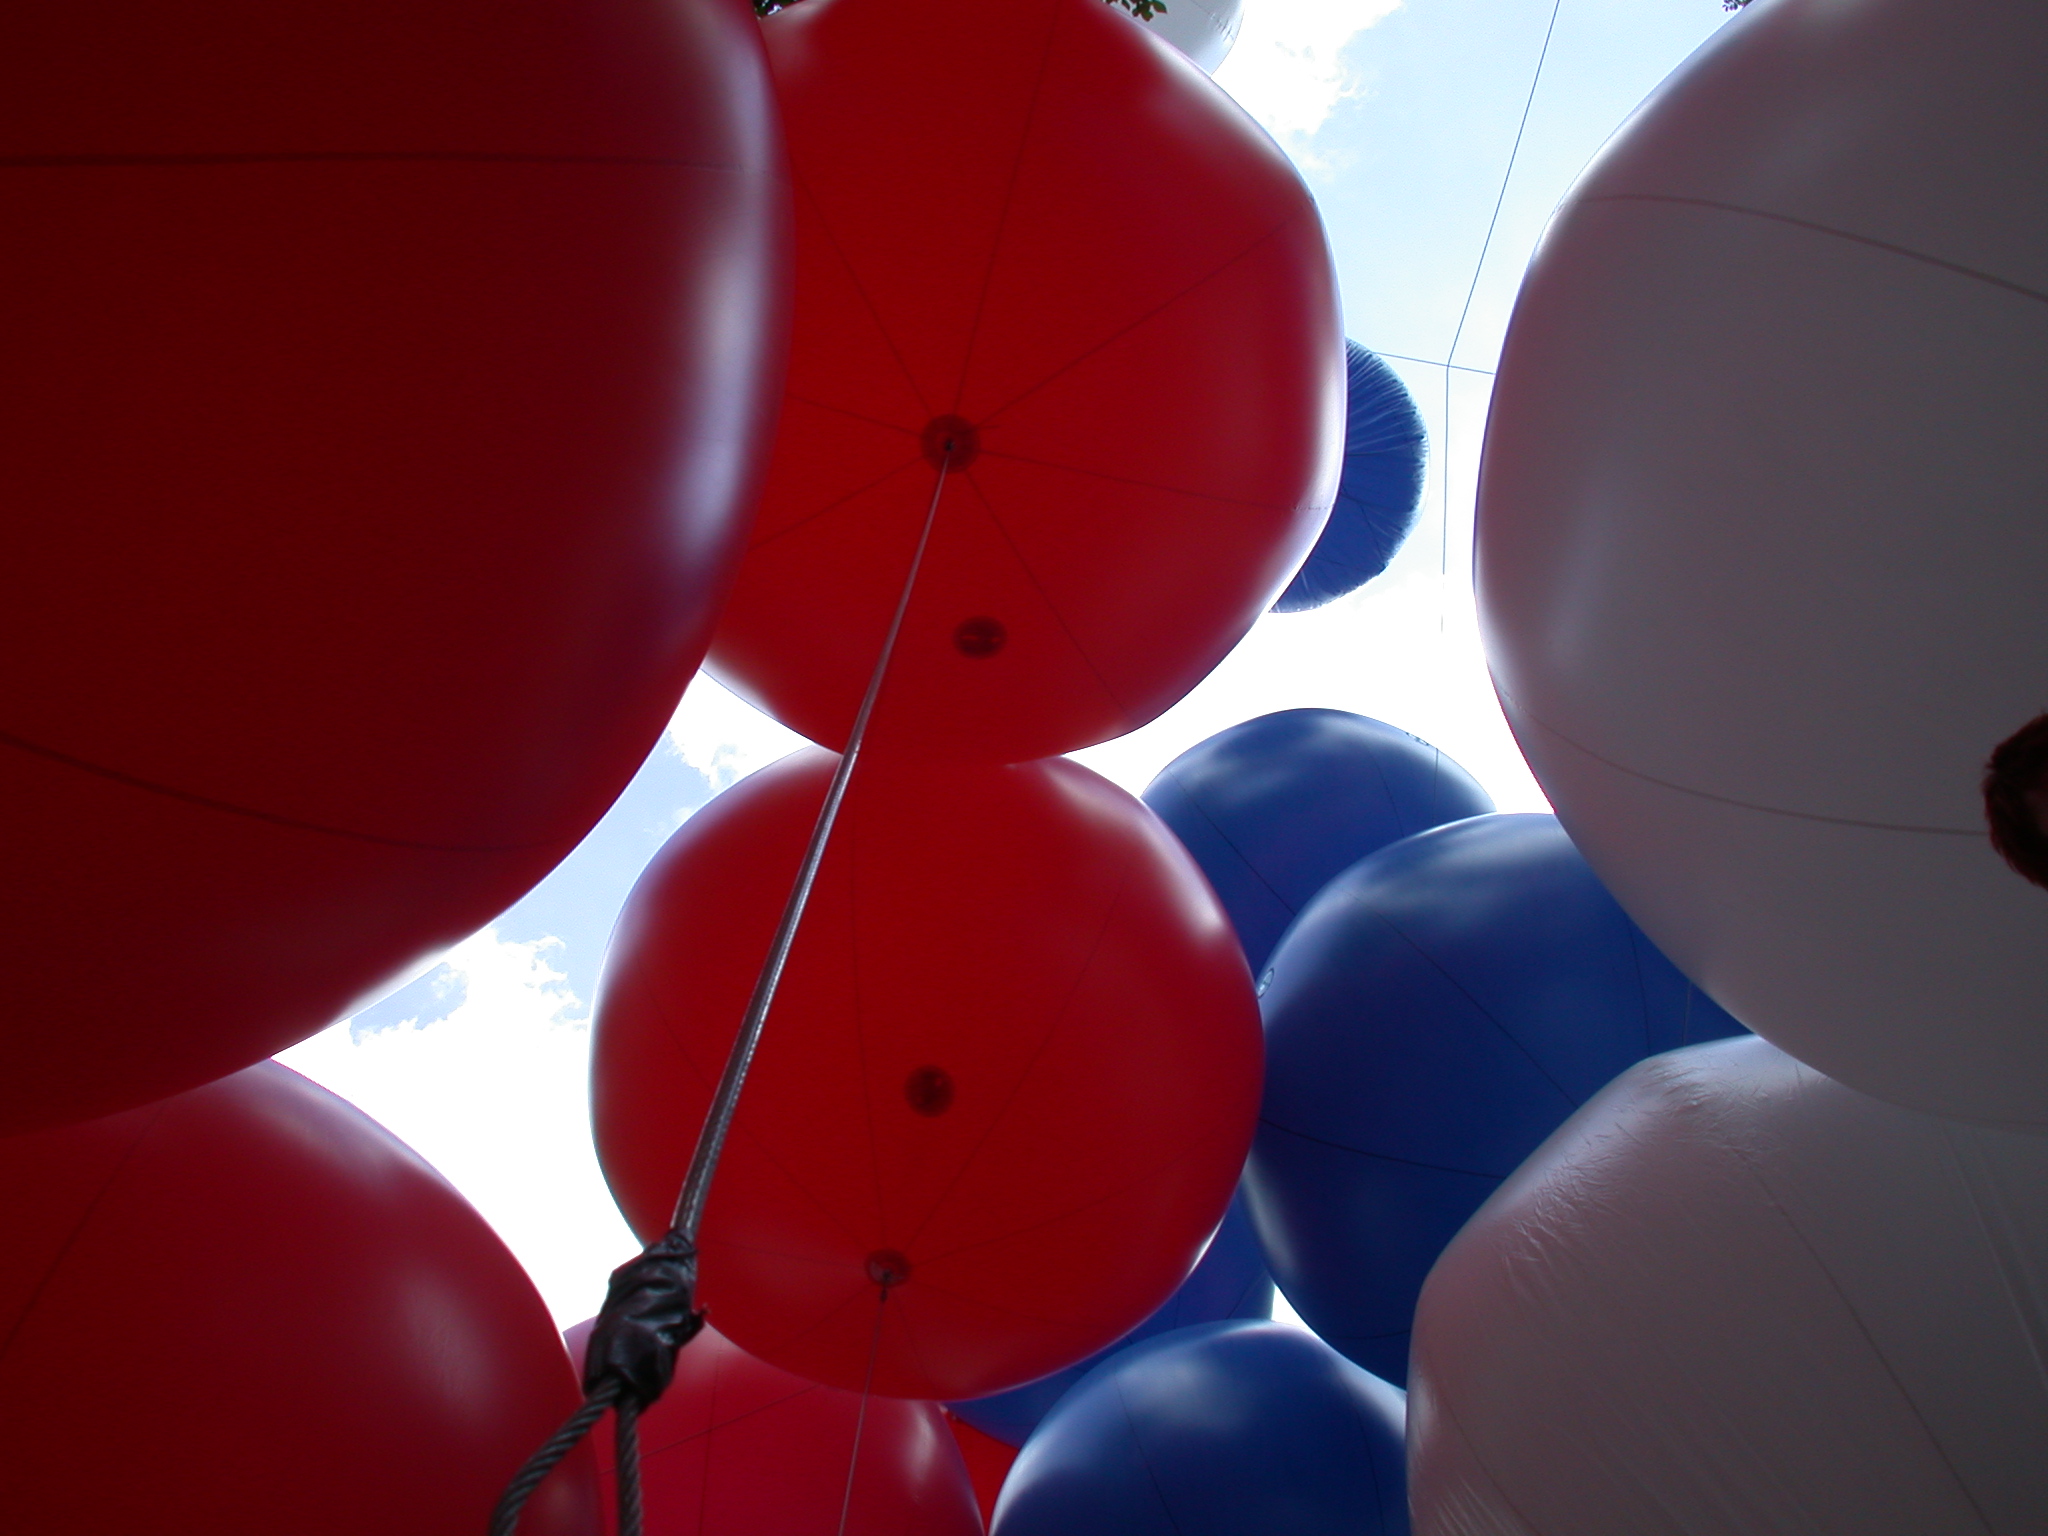 balloon balloons red white and blue